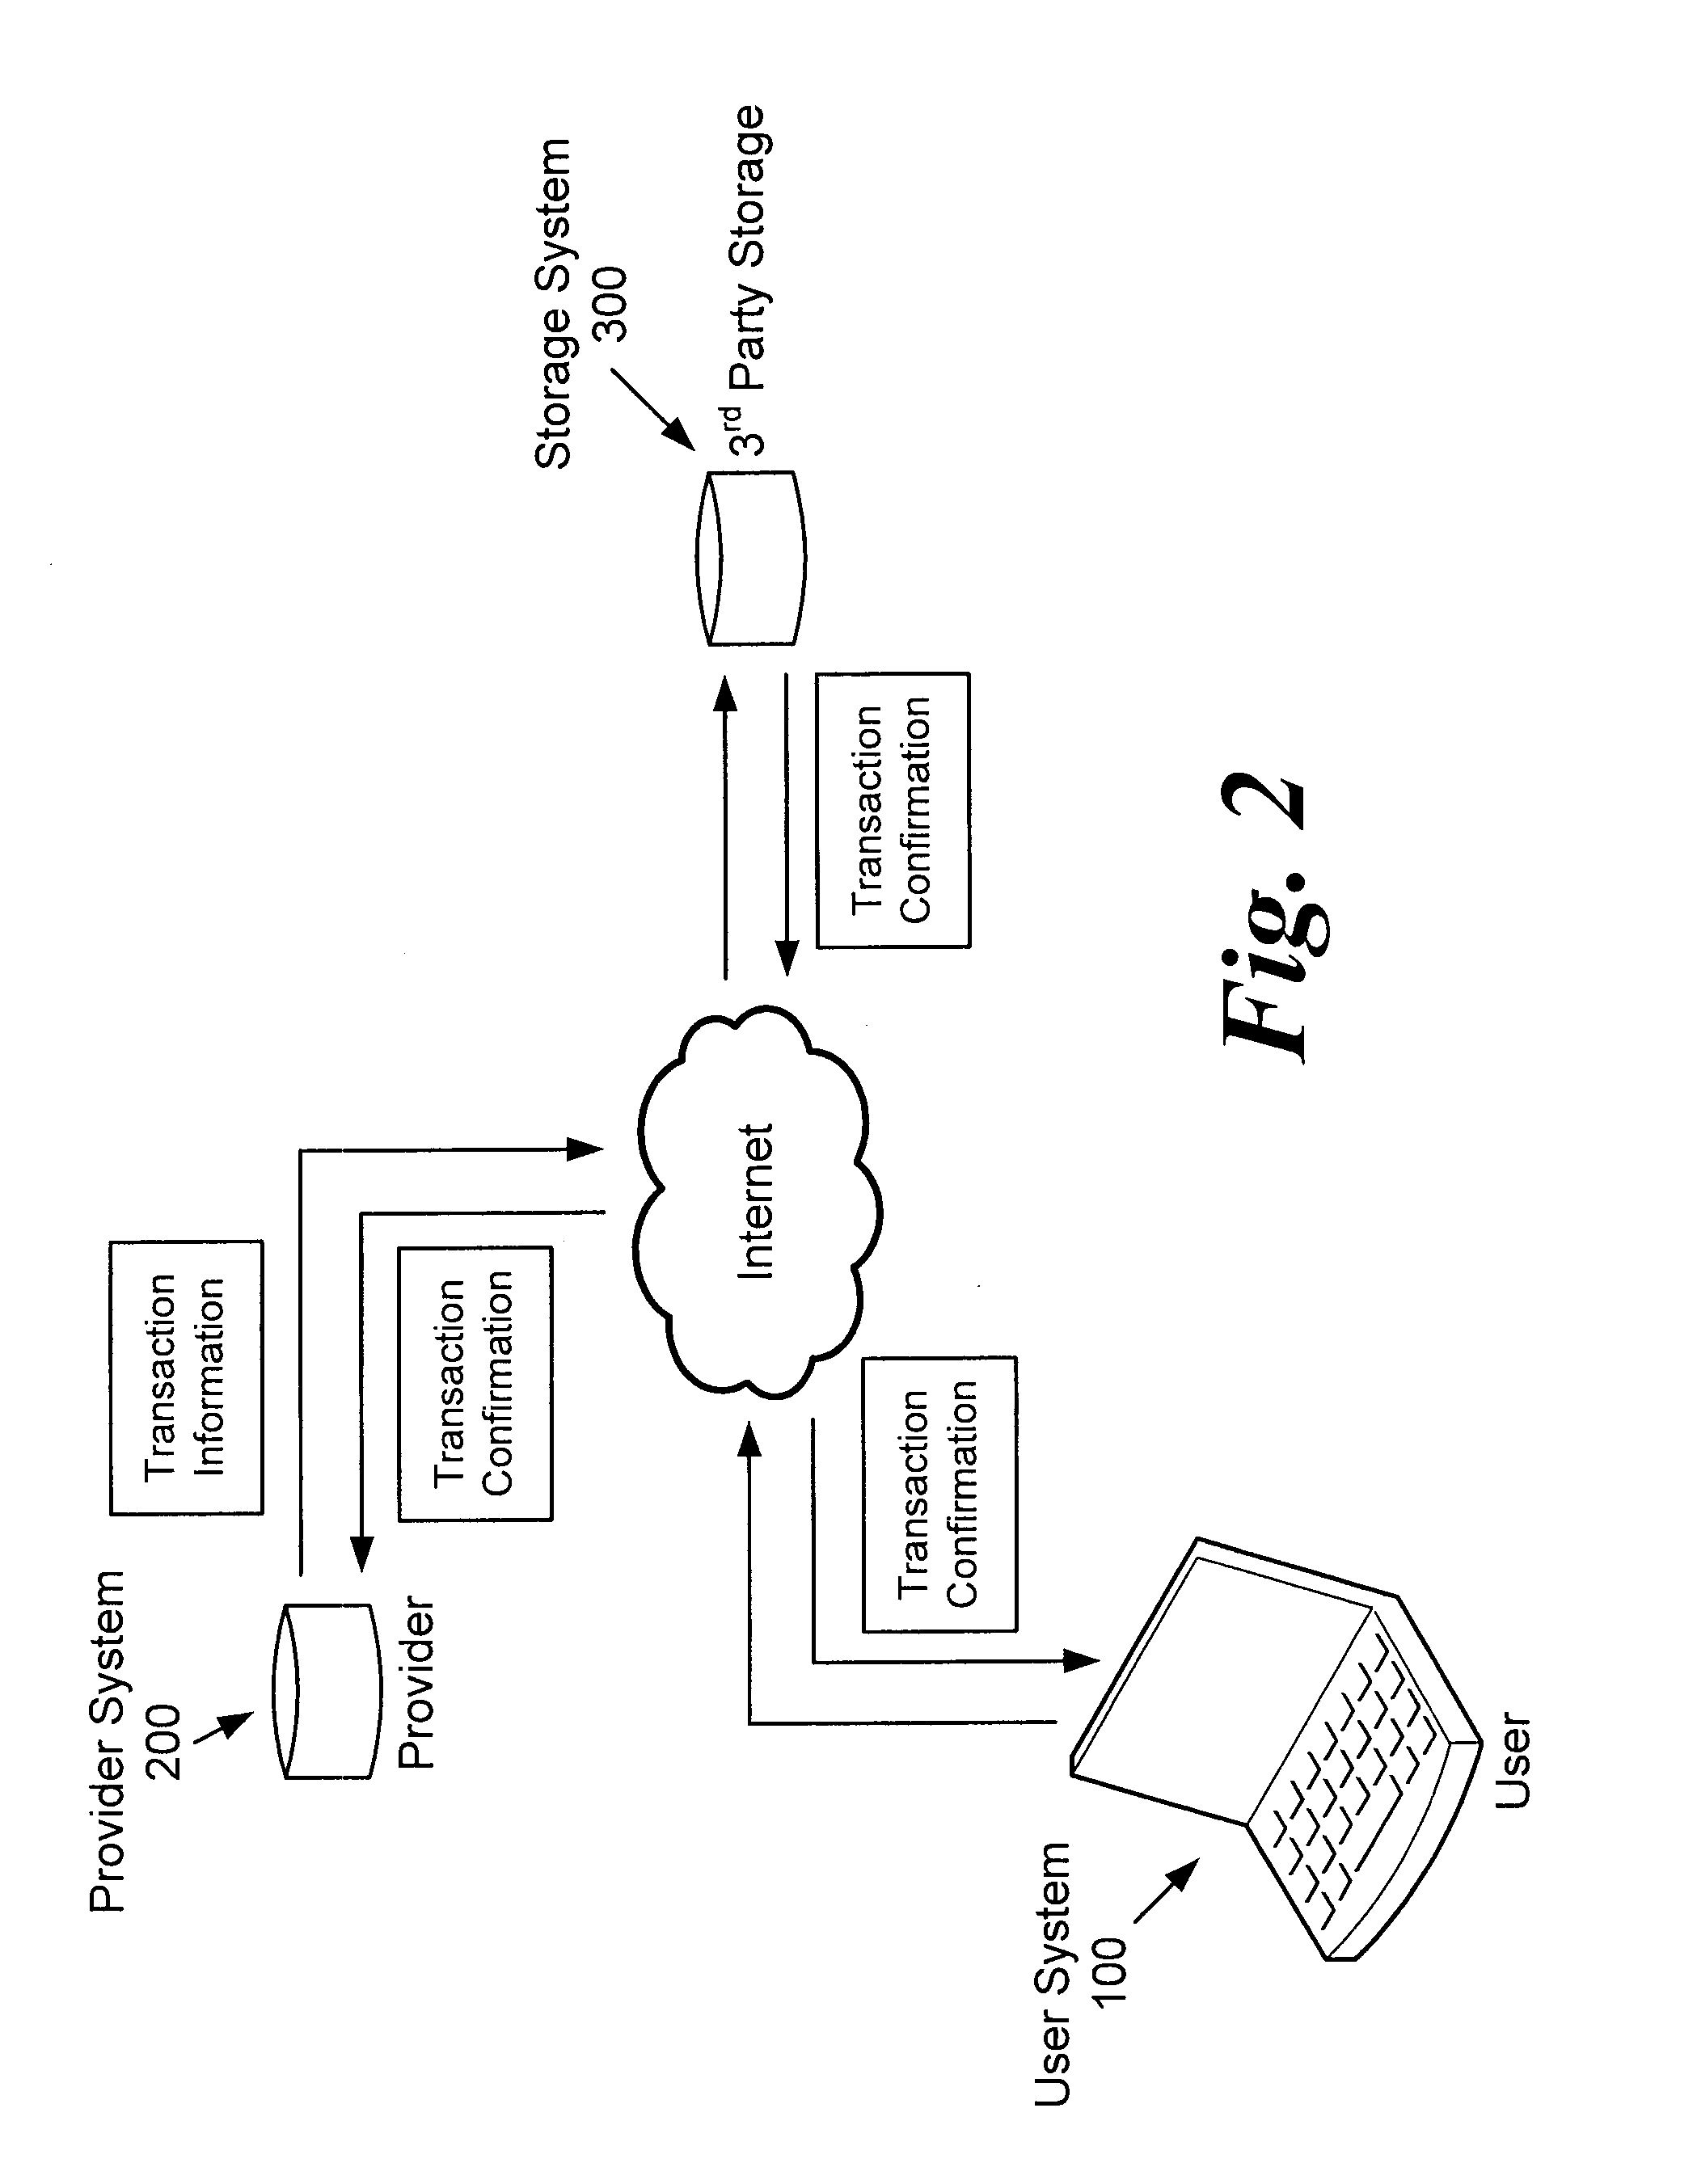 Archiving system and process for transaction records